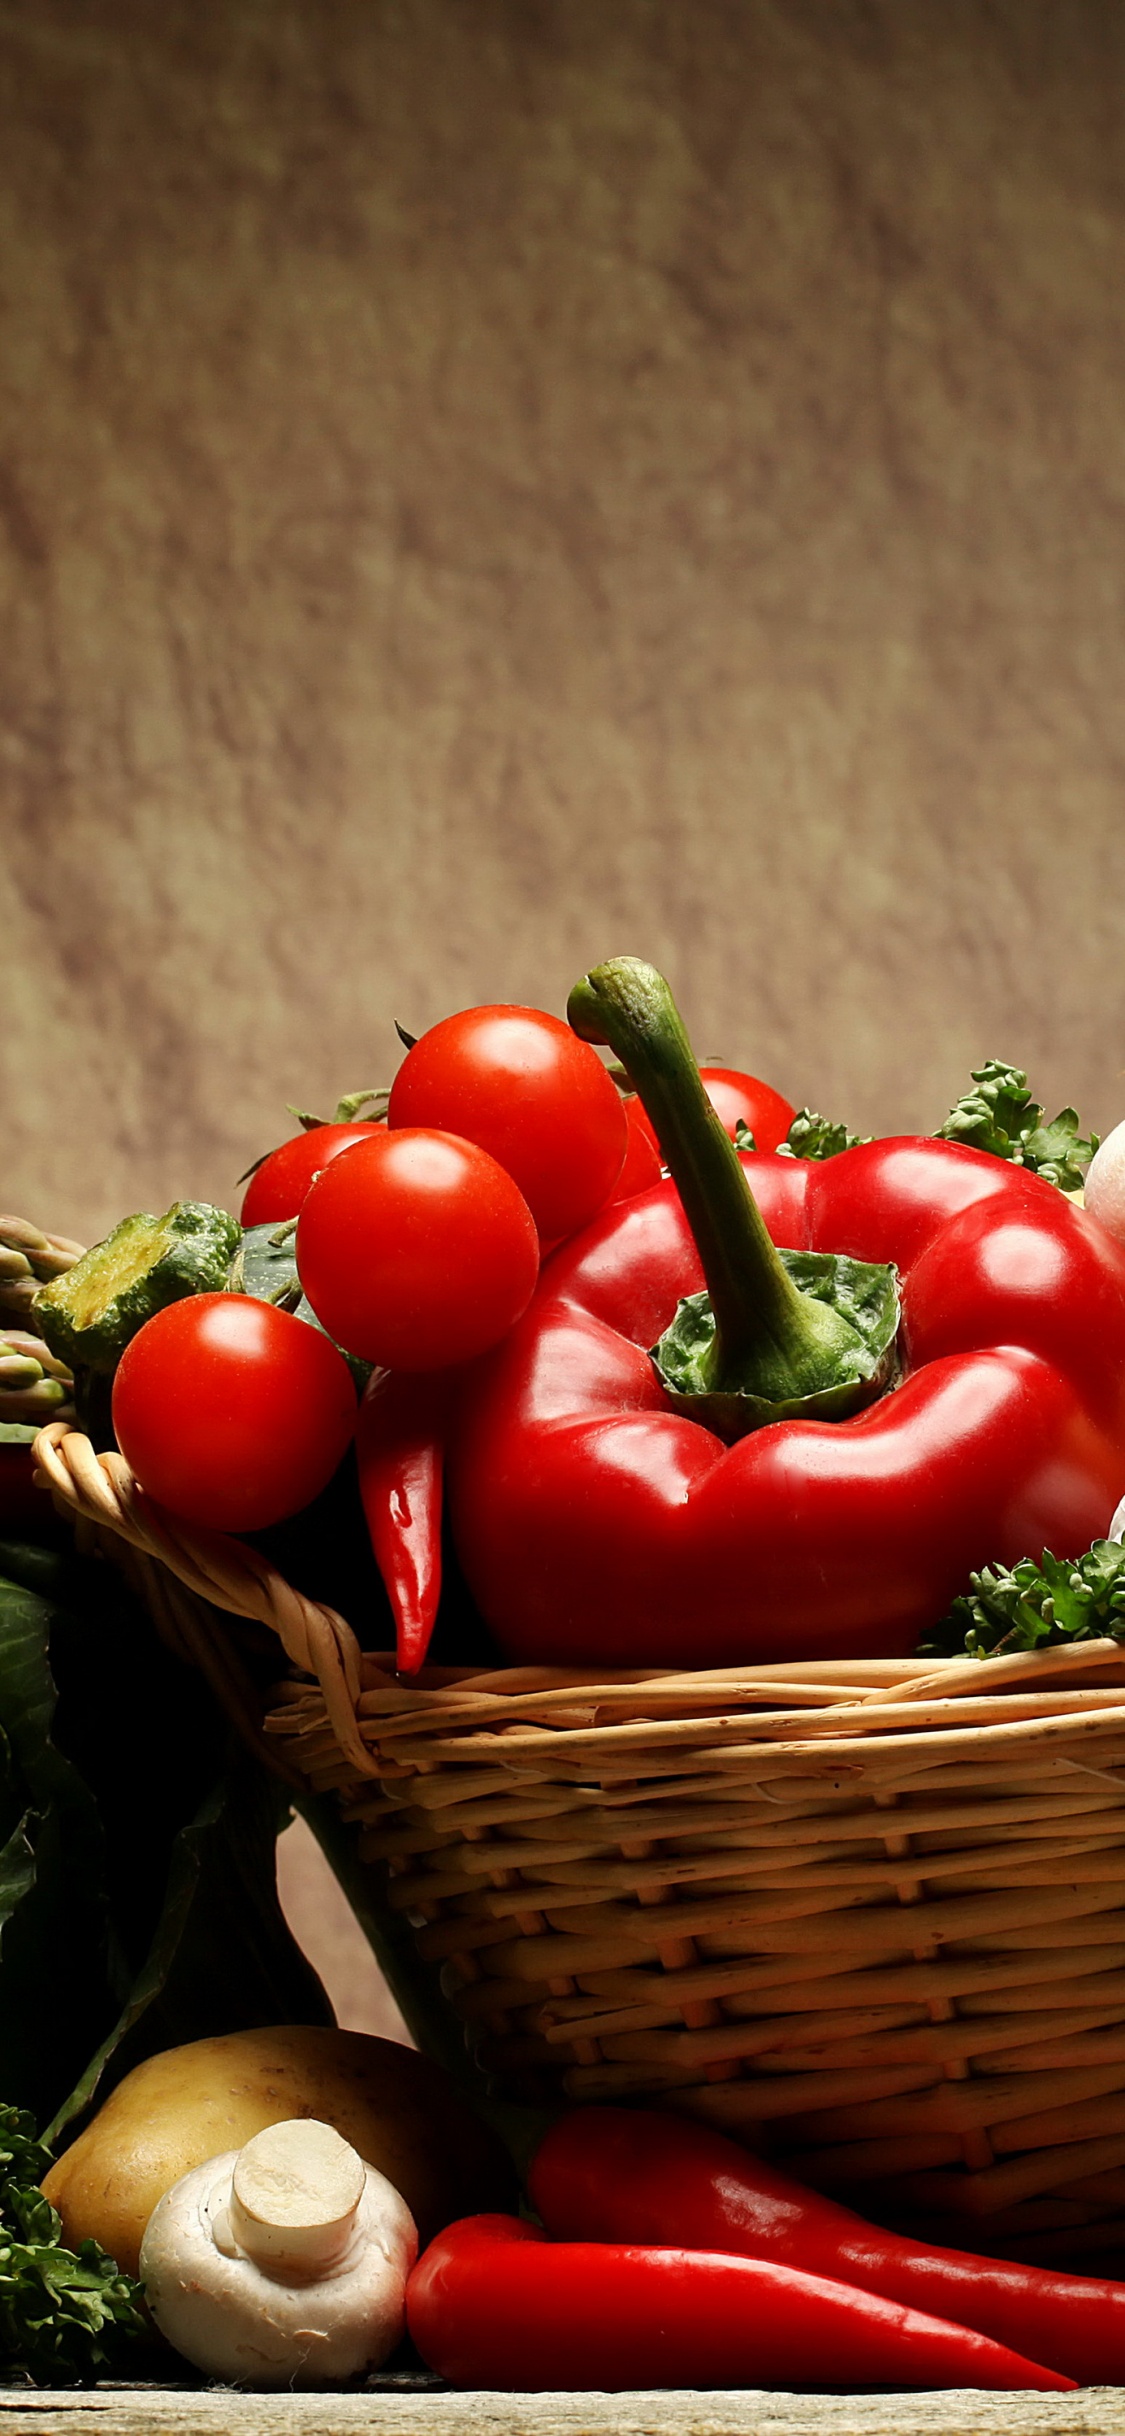 Red Tomatoes and Green Vegetable on Brown Woven Basket. Wallpaper in 1125x2436 Resolution